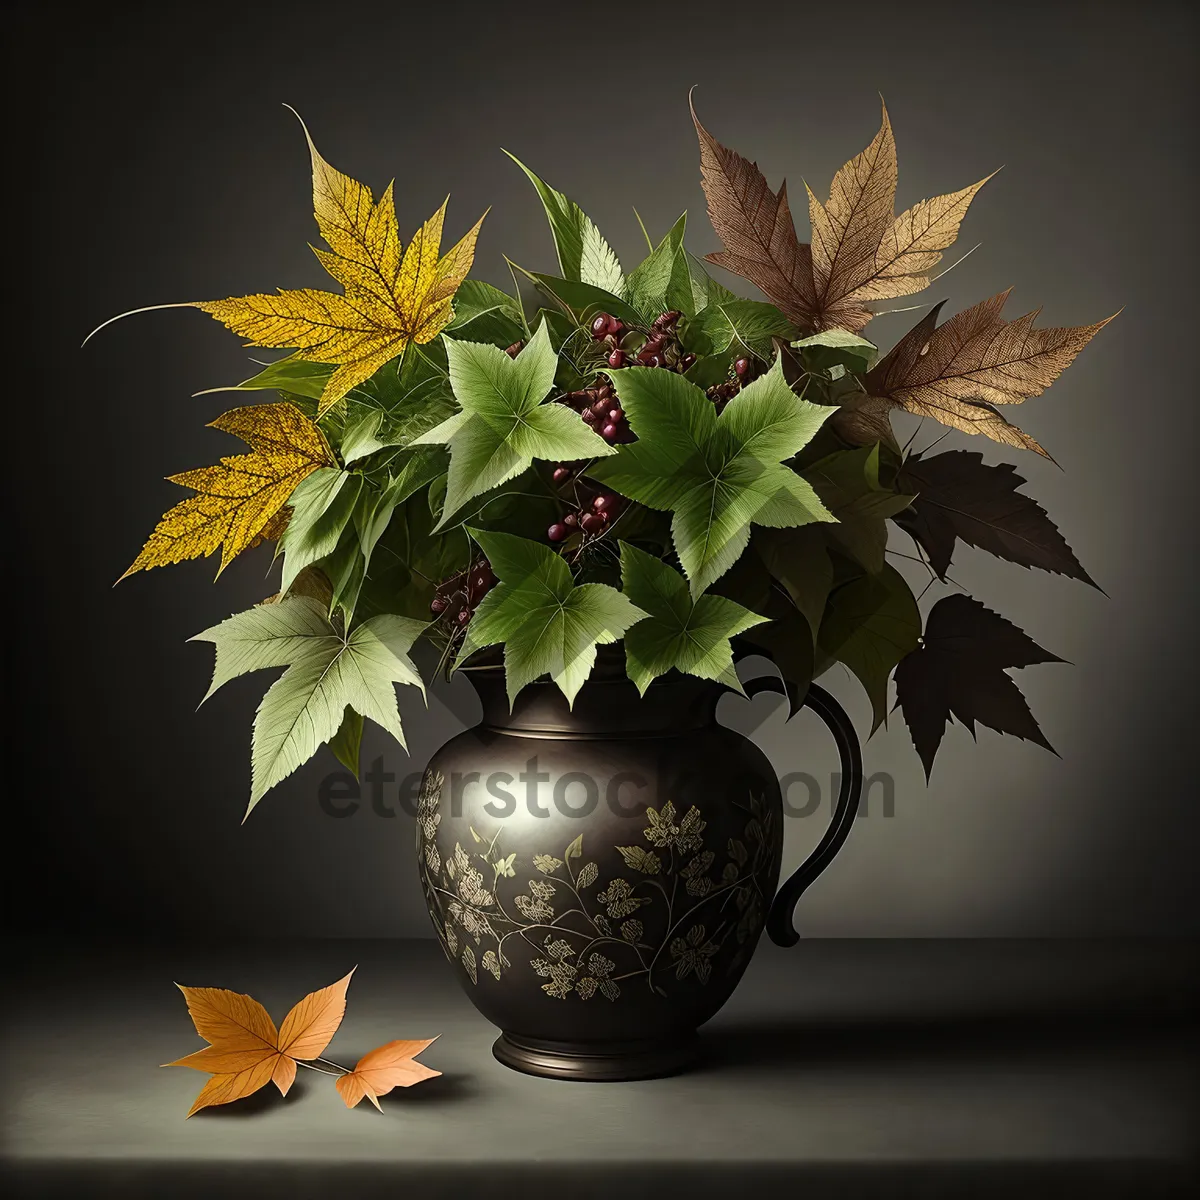 Picture of Colorful Holiday Vase with Leafy Decor and Branches